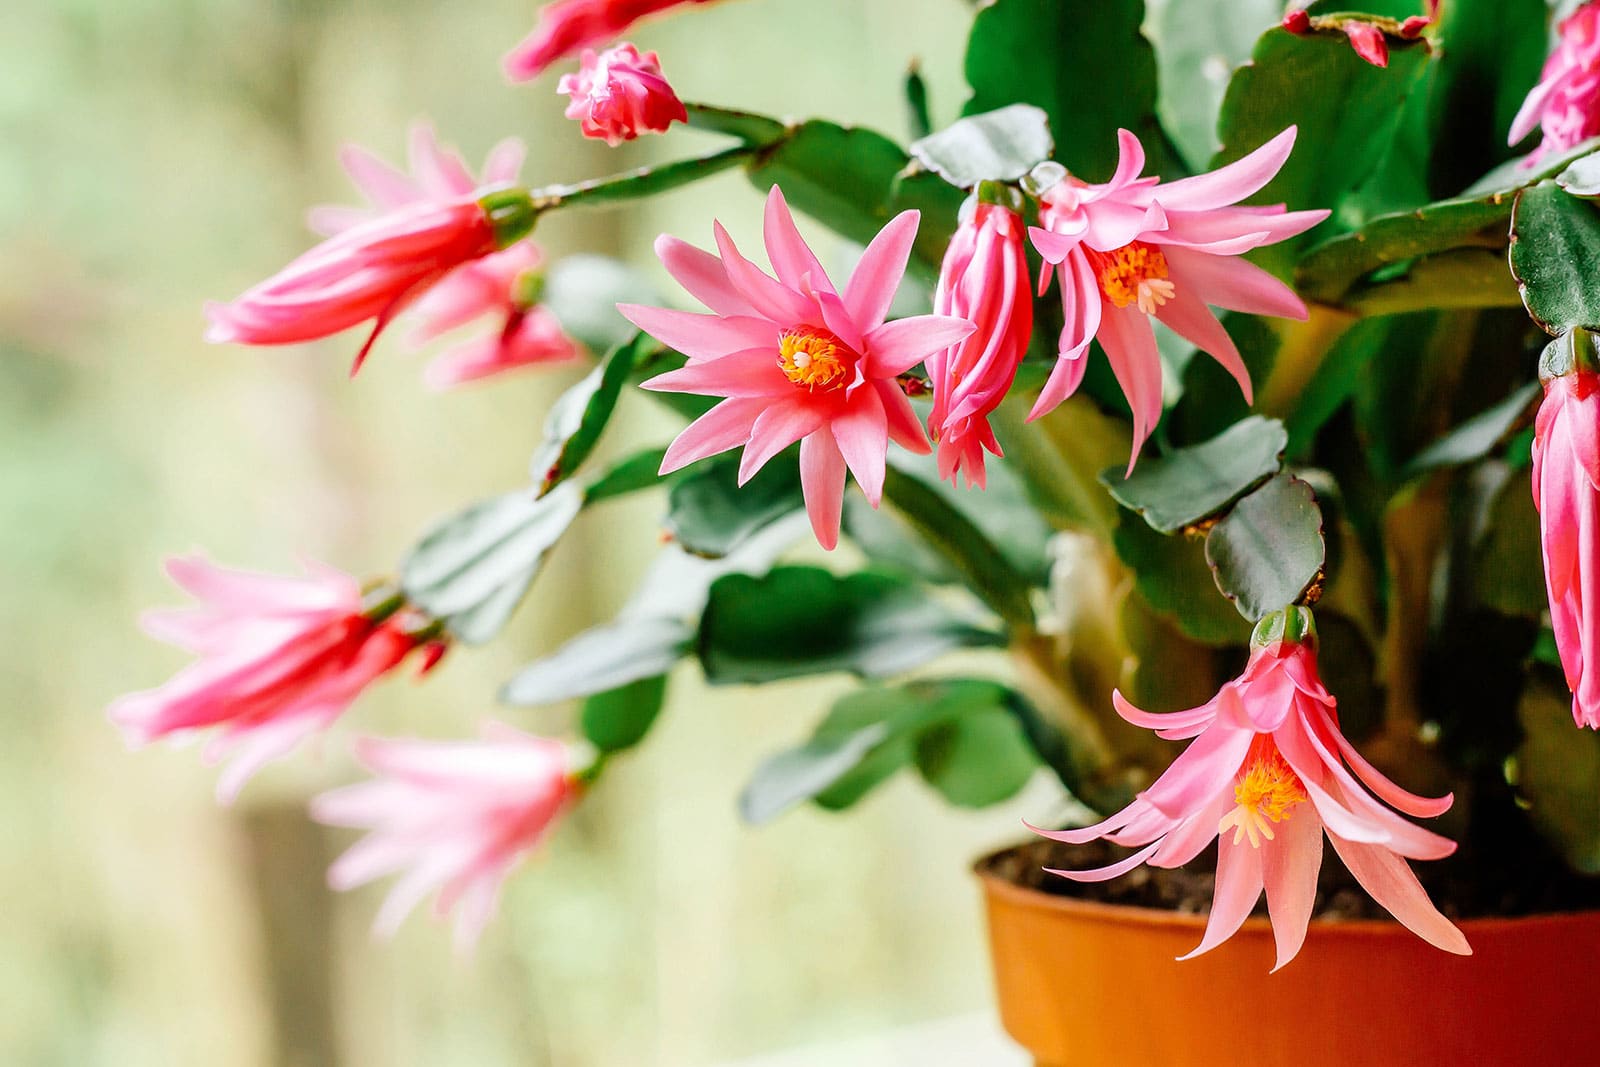 Secrets to getting Christmas cactus to bloom more than once a year